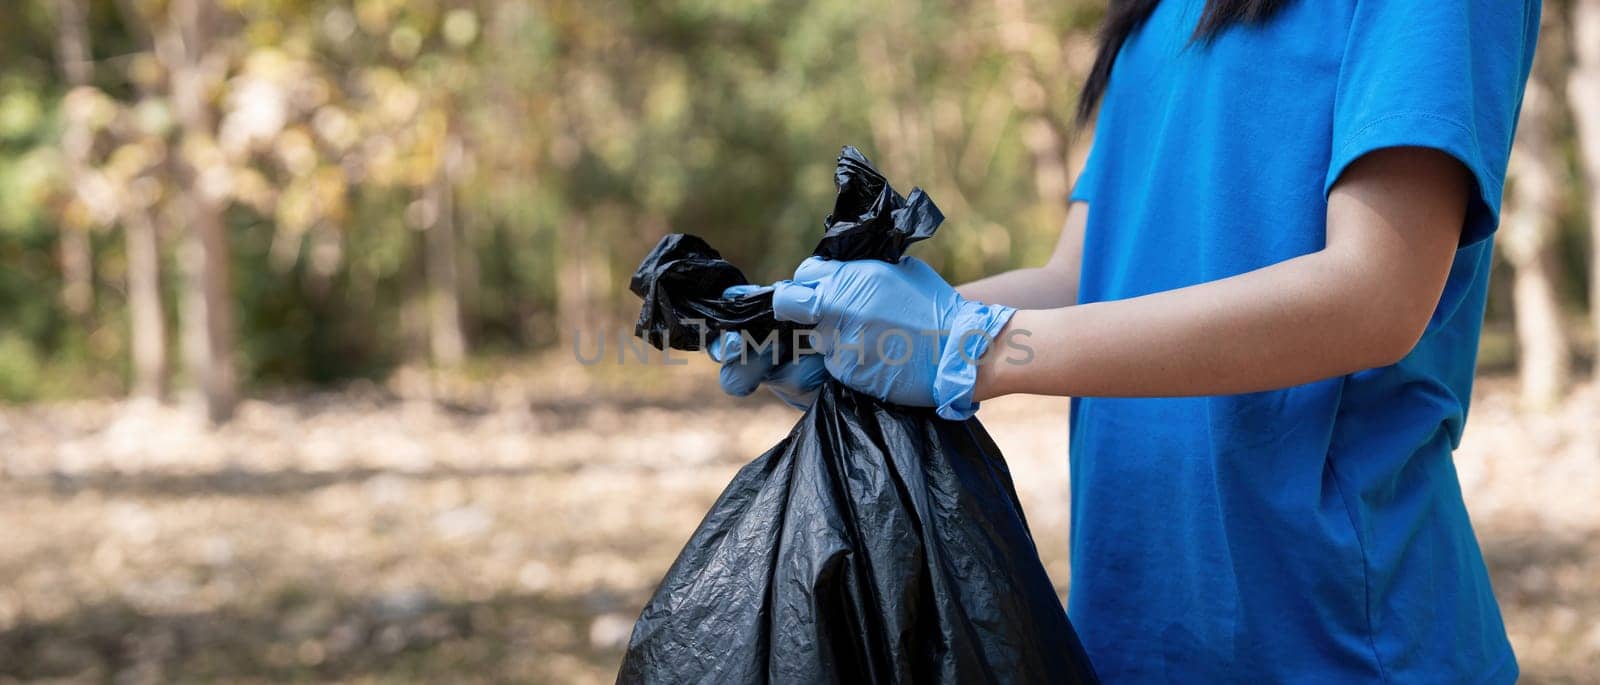 Separating waste to freshen the problem of environmental pollution and global warming, plastic waste, care for nature. Volunteer concept carrying garbage bags collecting the garbage by nateemee